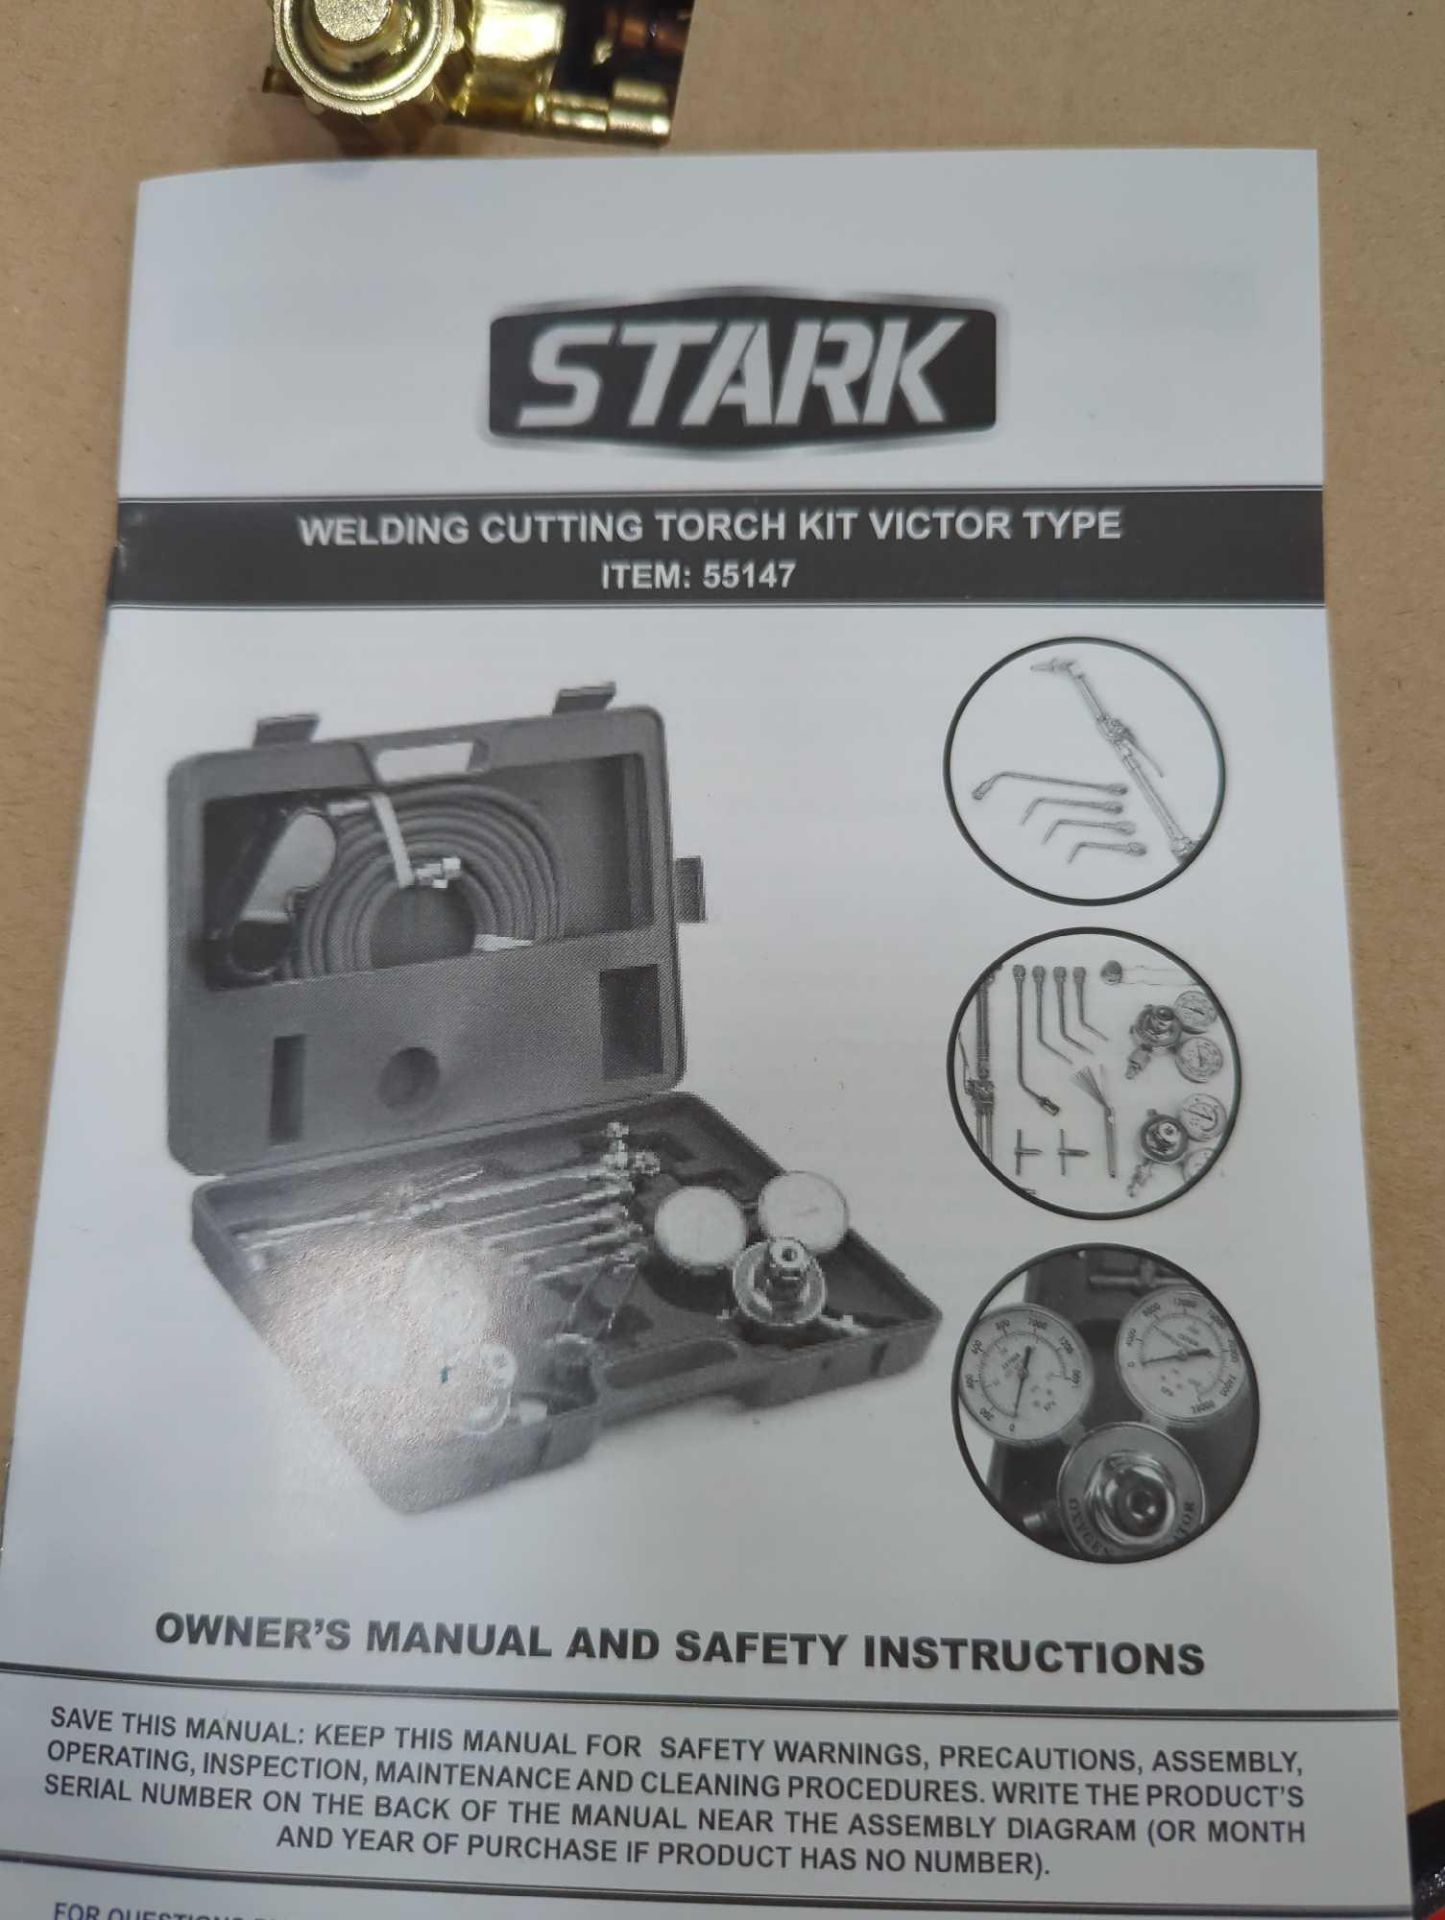 Stark welding cutting torch kit/folding chairs - Image 5 of 10